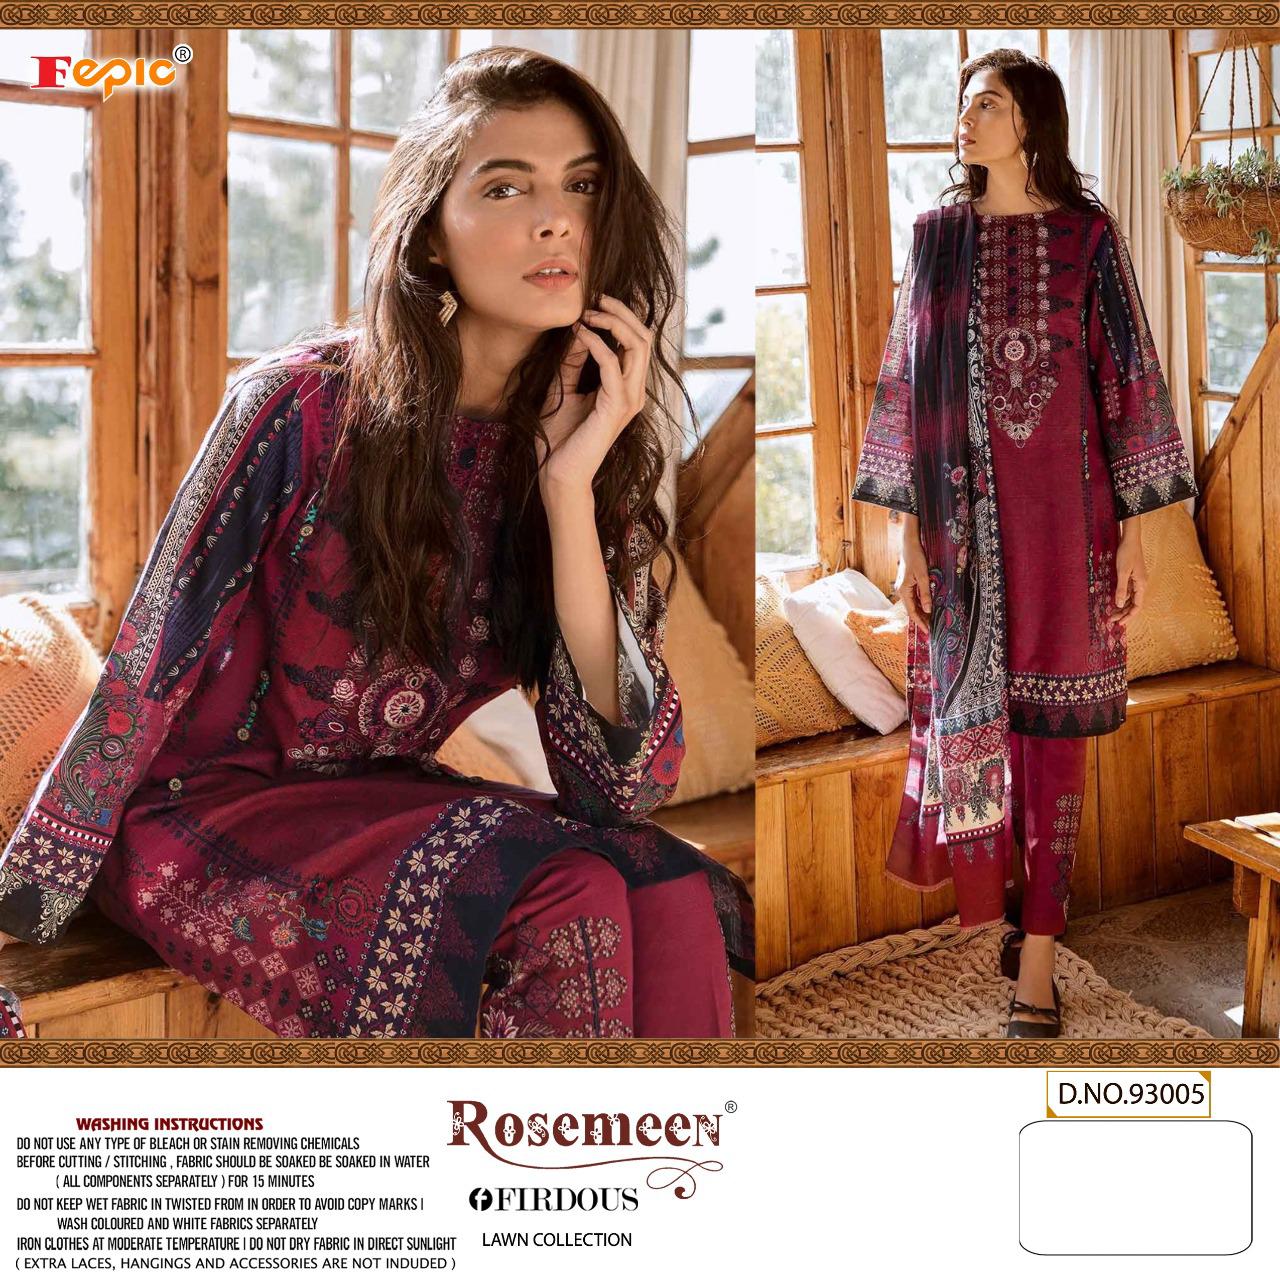 Fepic Rosemeen Firdous Lawn Collection 93005